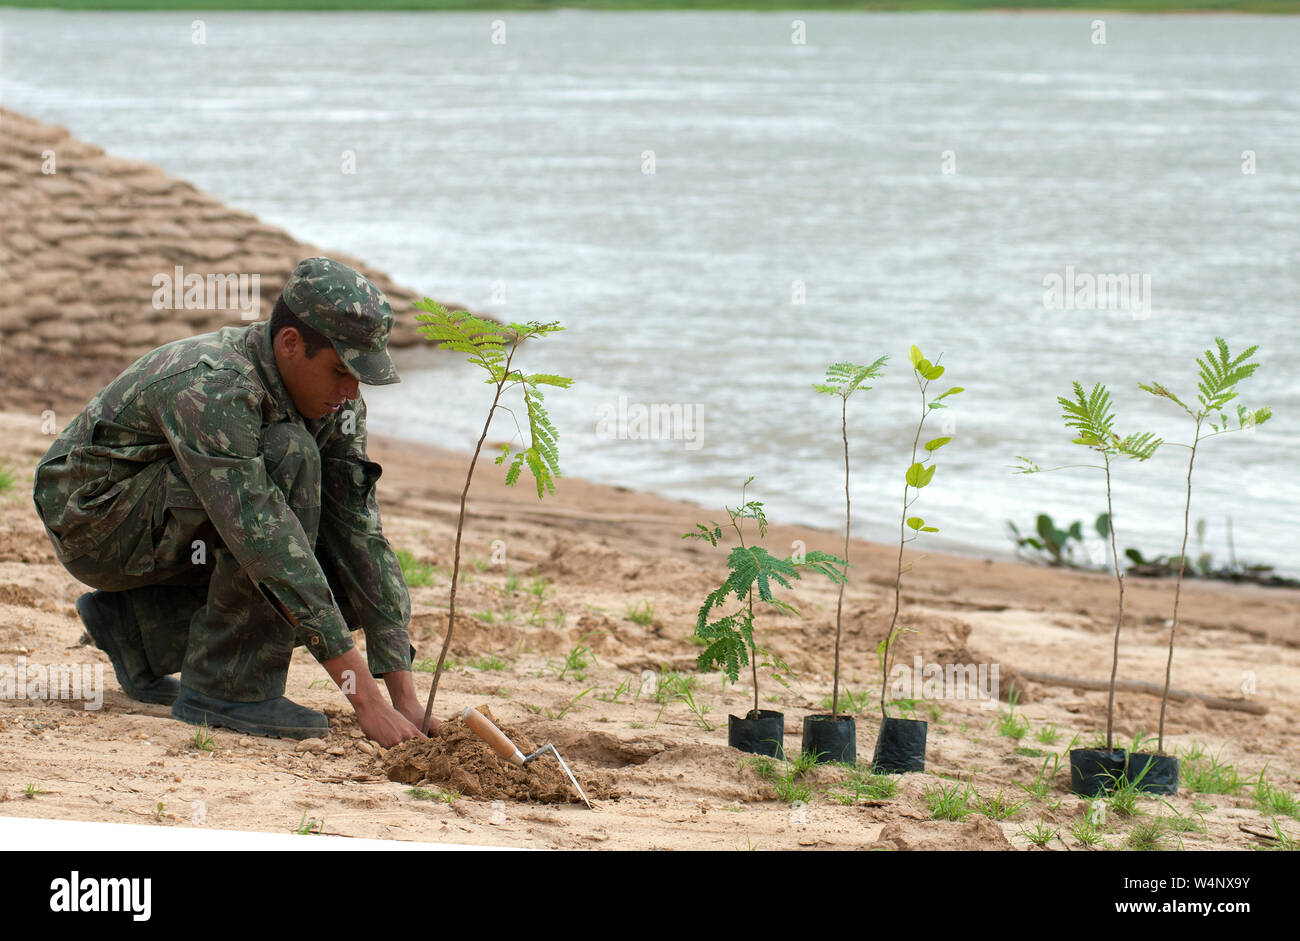 Bahia, September 22, 2006. Army soldier planting tree seedlings on the banks of the São Francisco river to avoid silting the São Francisco river in th Stock Photo